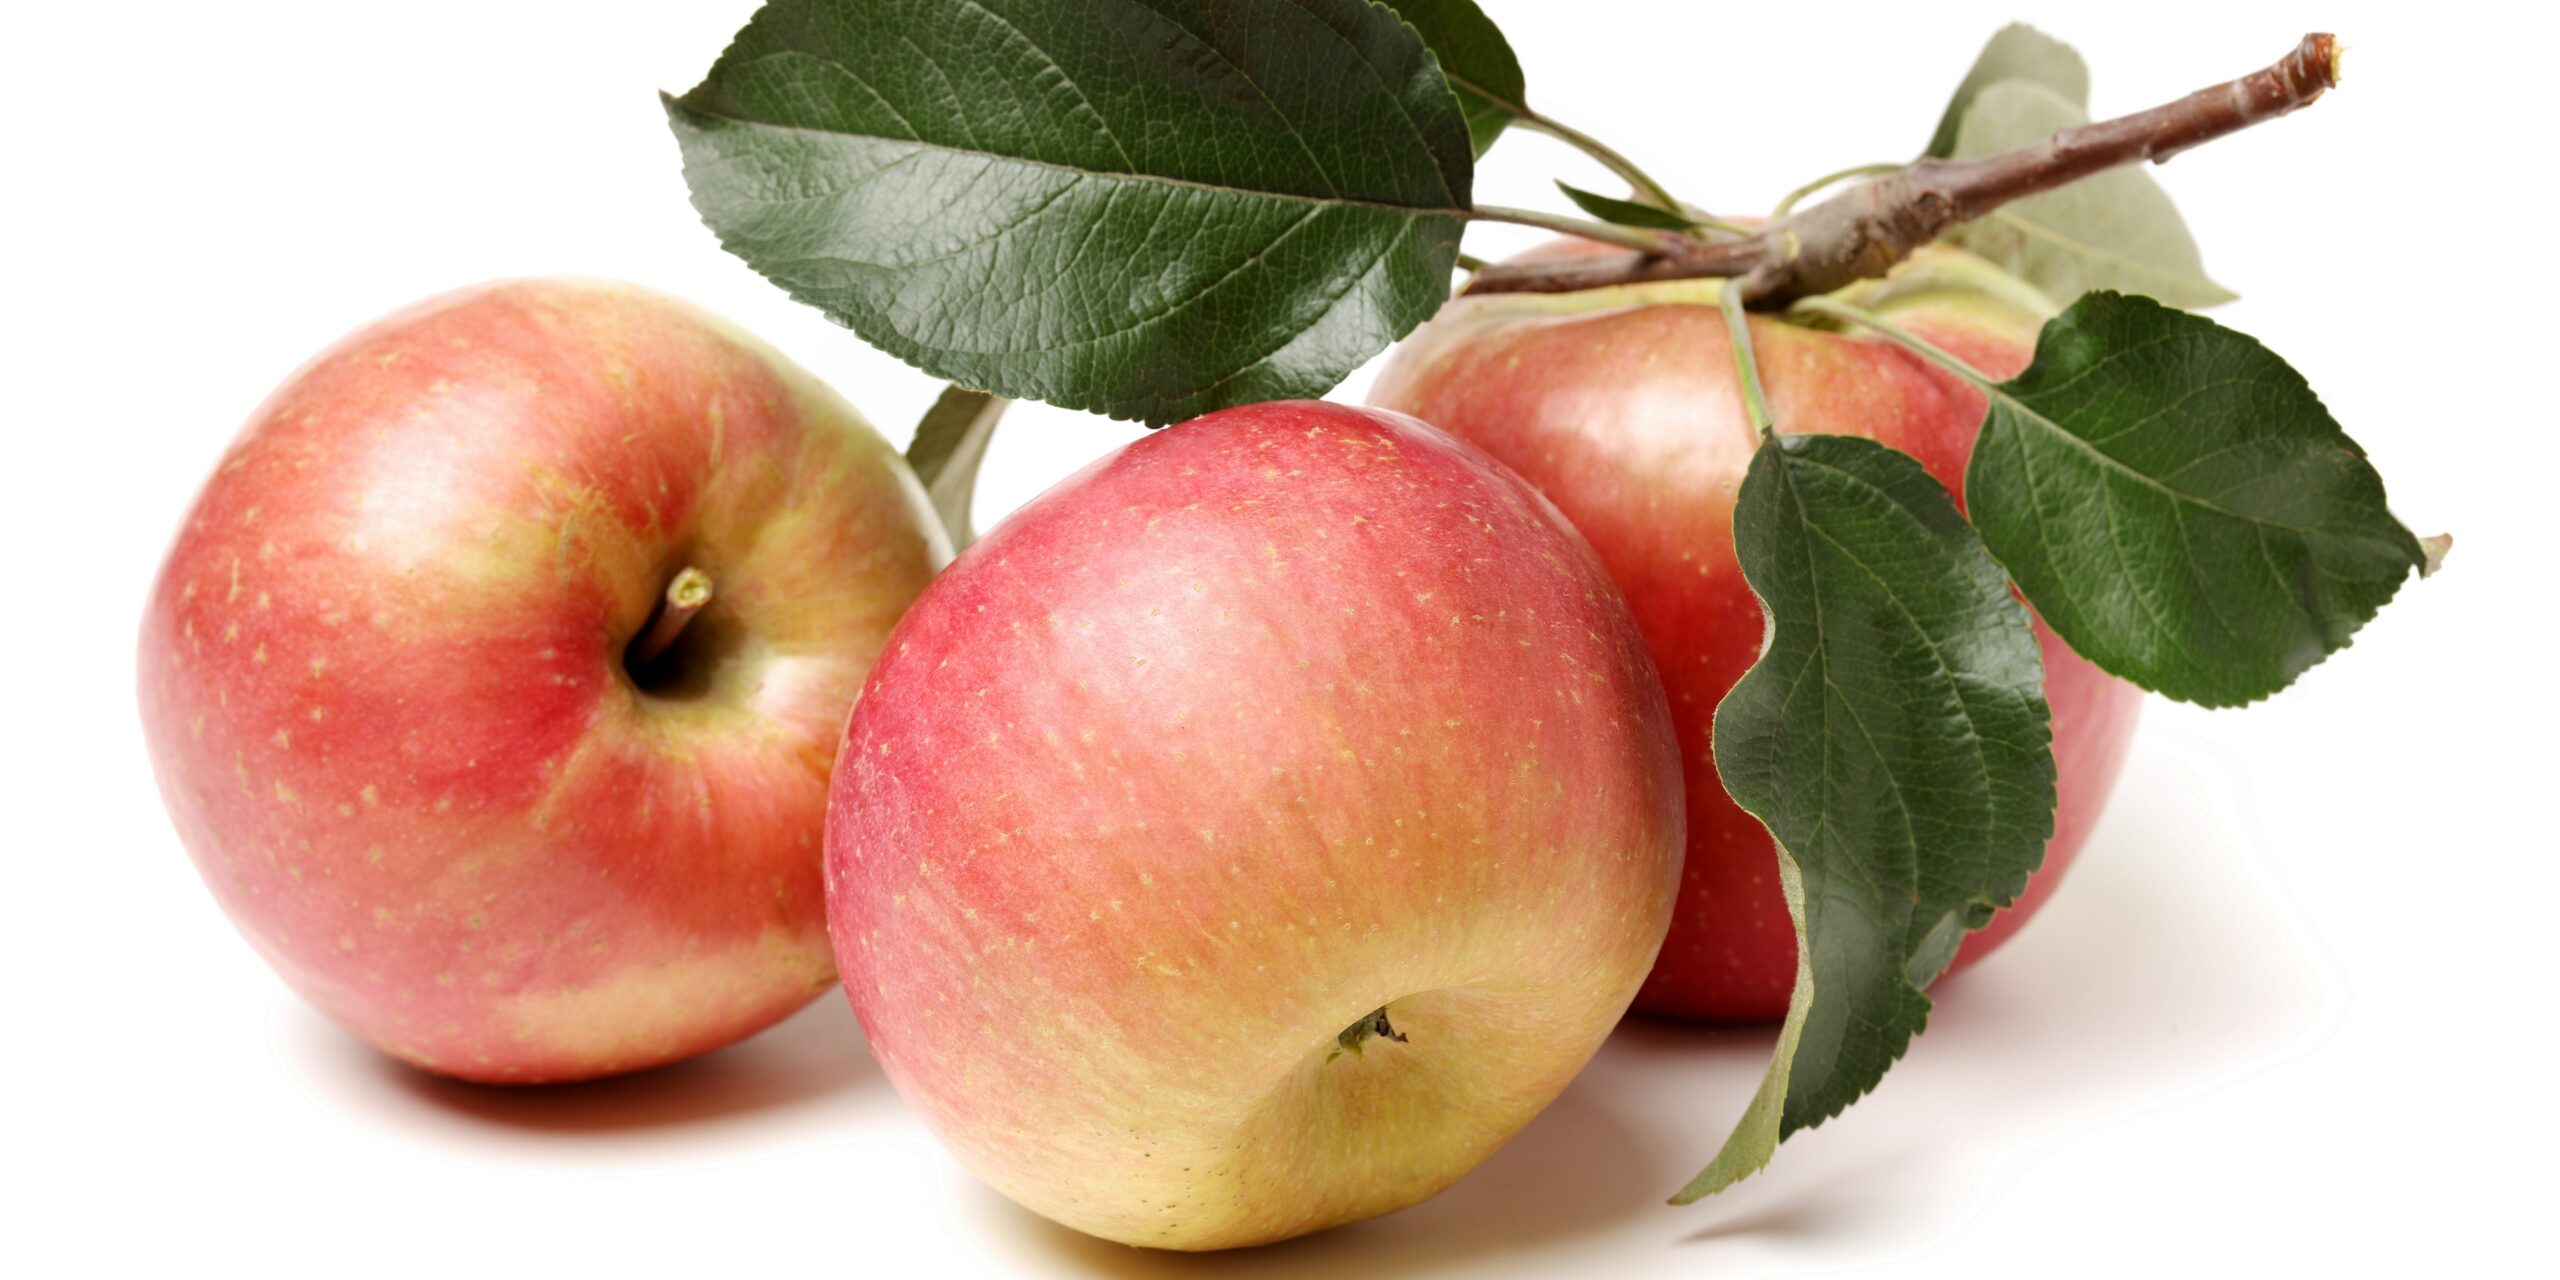 Apples help lower blood pressure and cholesterol levels